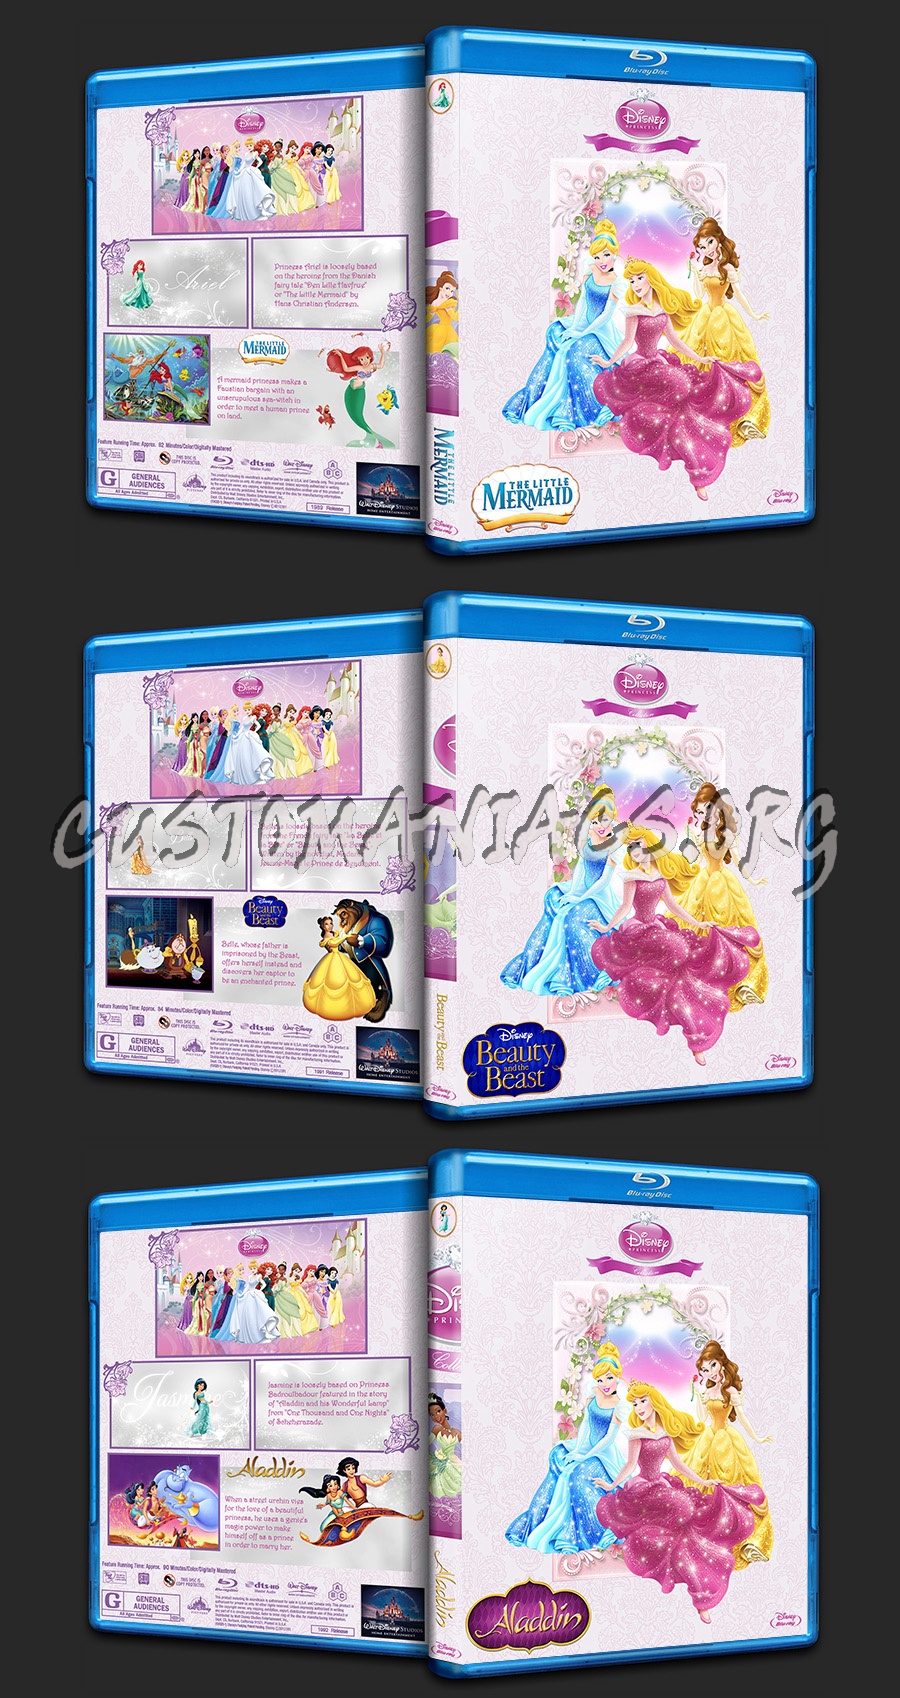 The Disney Princess Collection blu-ray cover